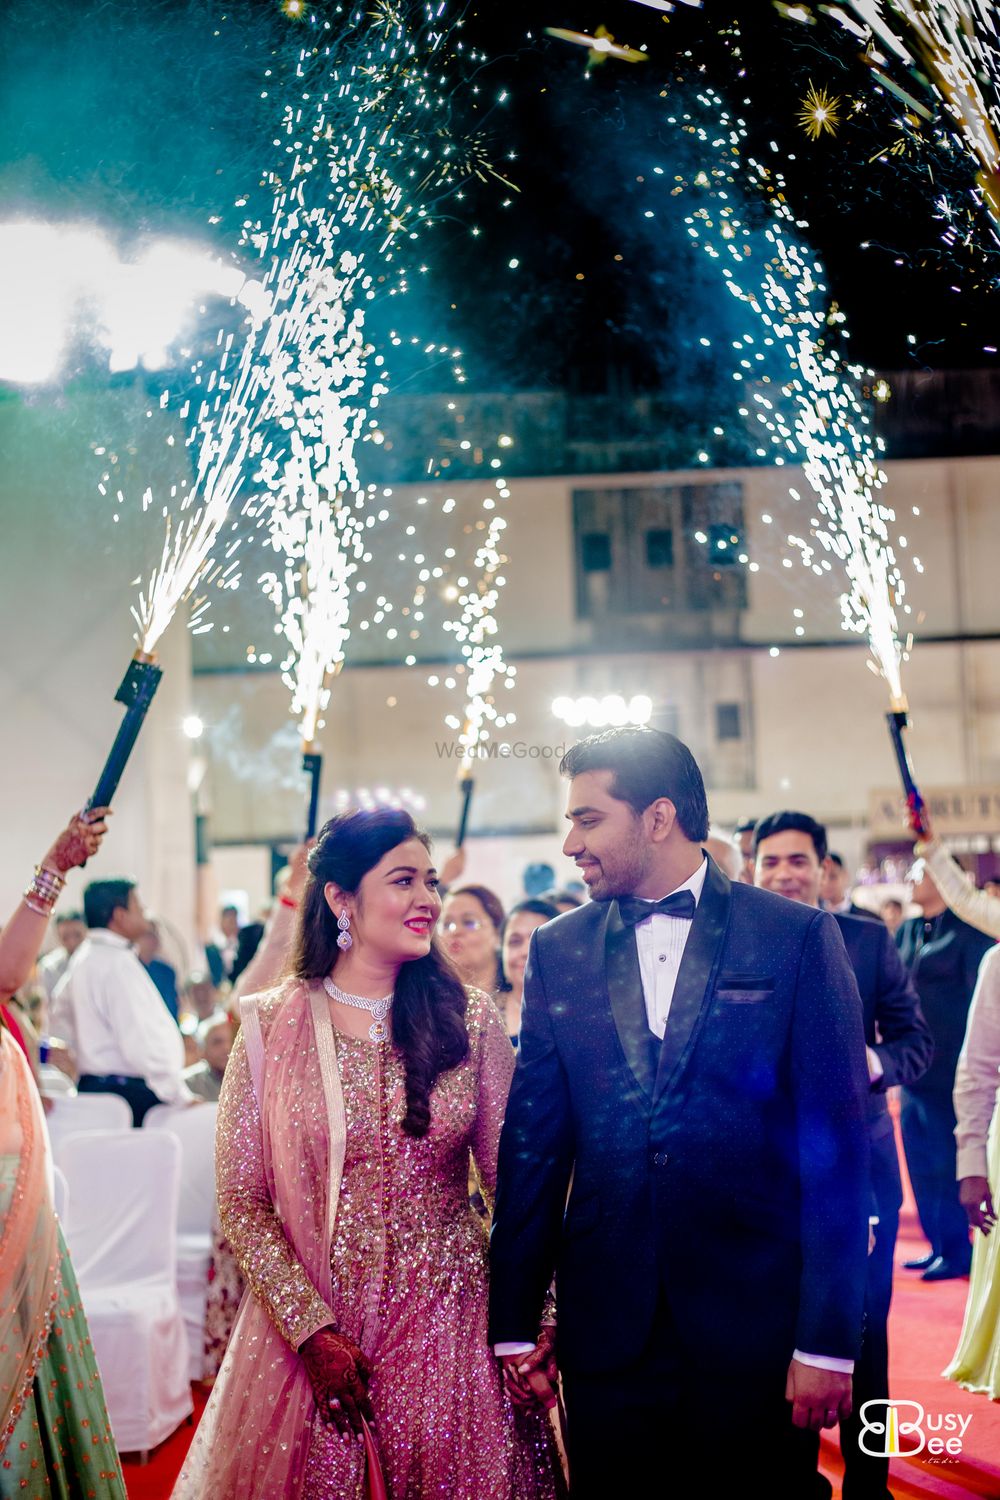 Photo of Guests holding cold pyros on bride and groom entry